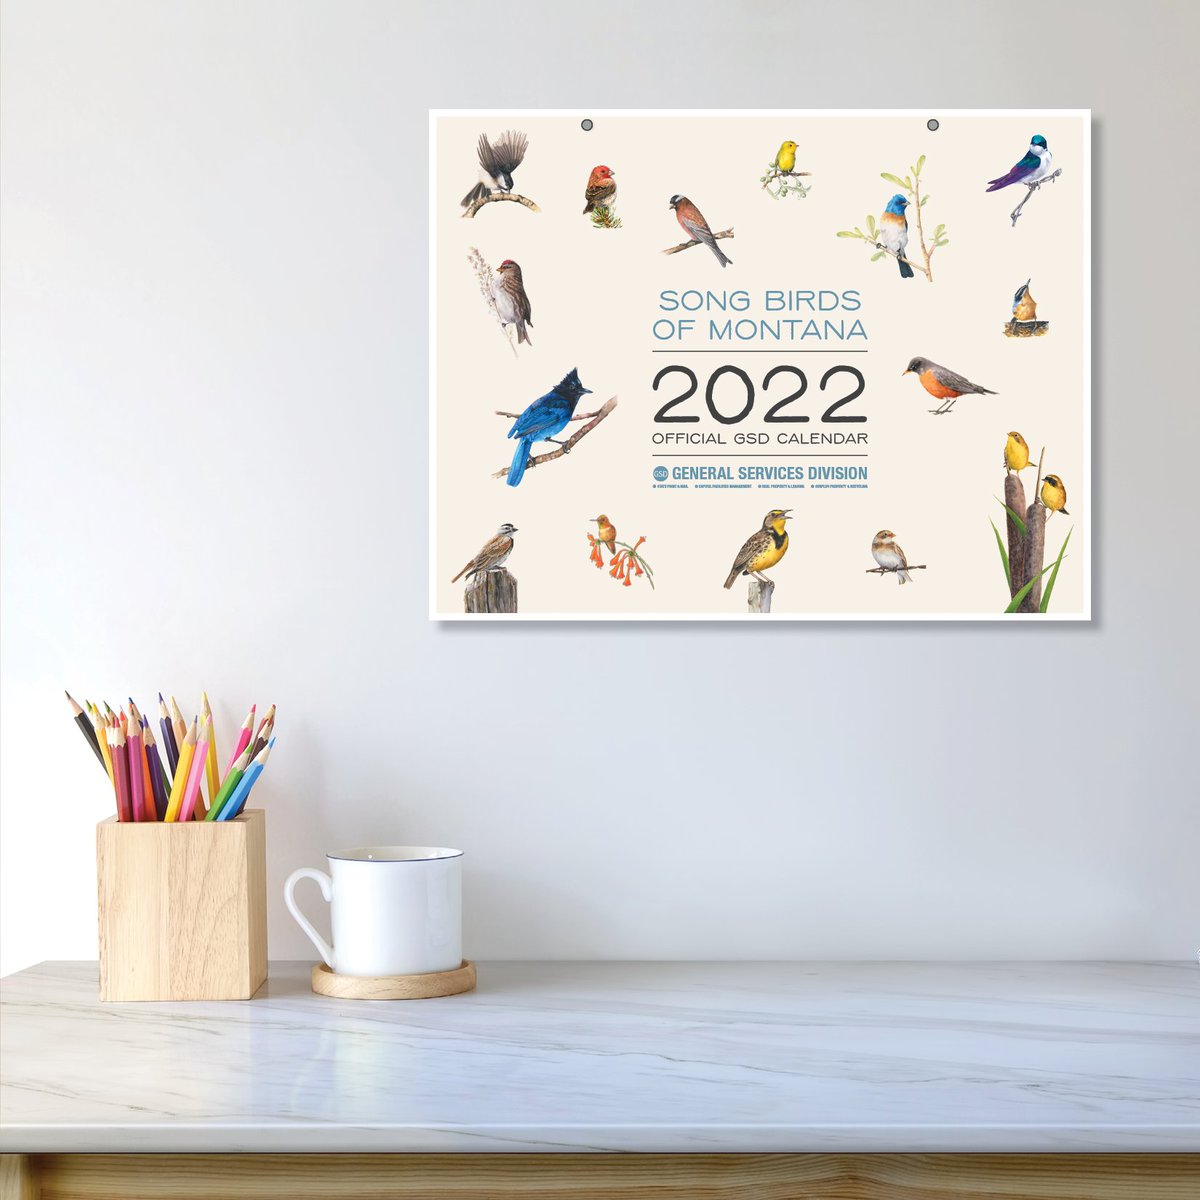 2022 calendars from GSD are now available! Check out bit.ly/3CQATqD for more details and to place your order today!